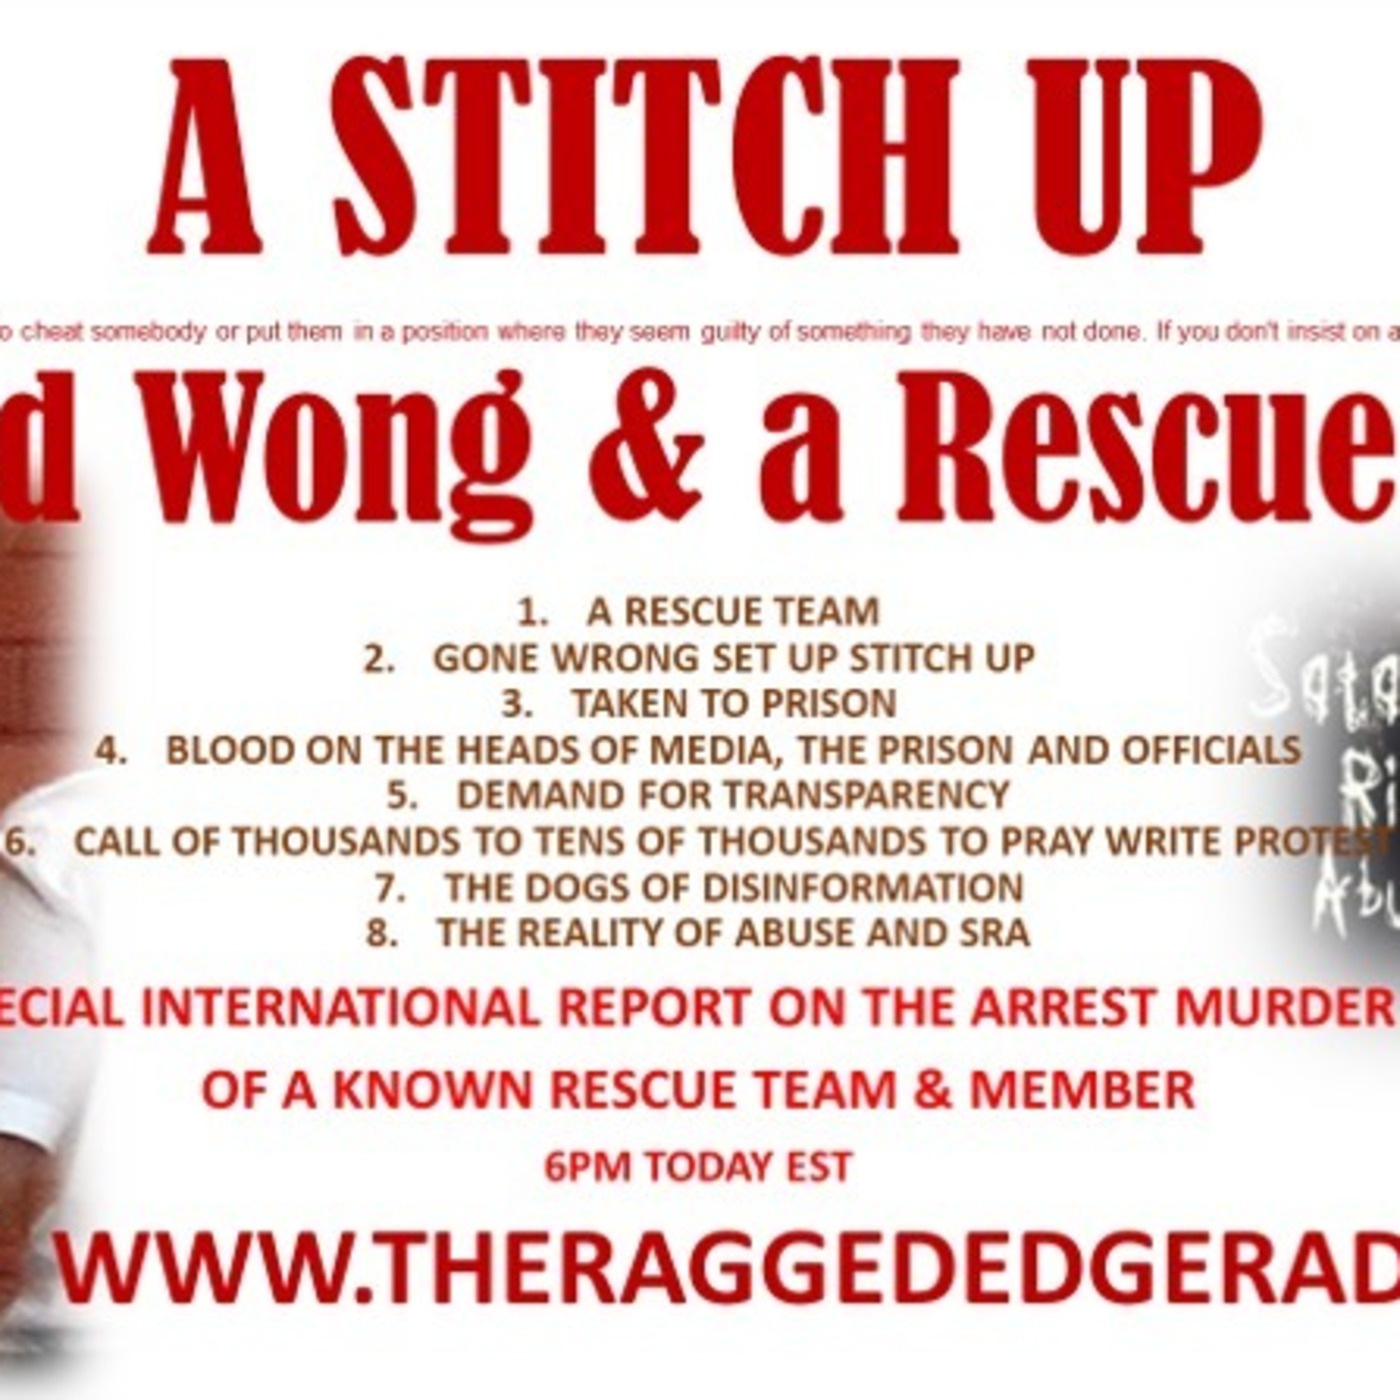 Episode 1601: SPECIAL REPORT WILFRED WONG & RESCUE TEAM  ... murder, danger and help